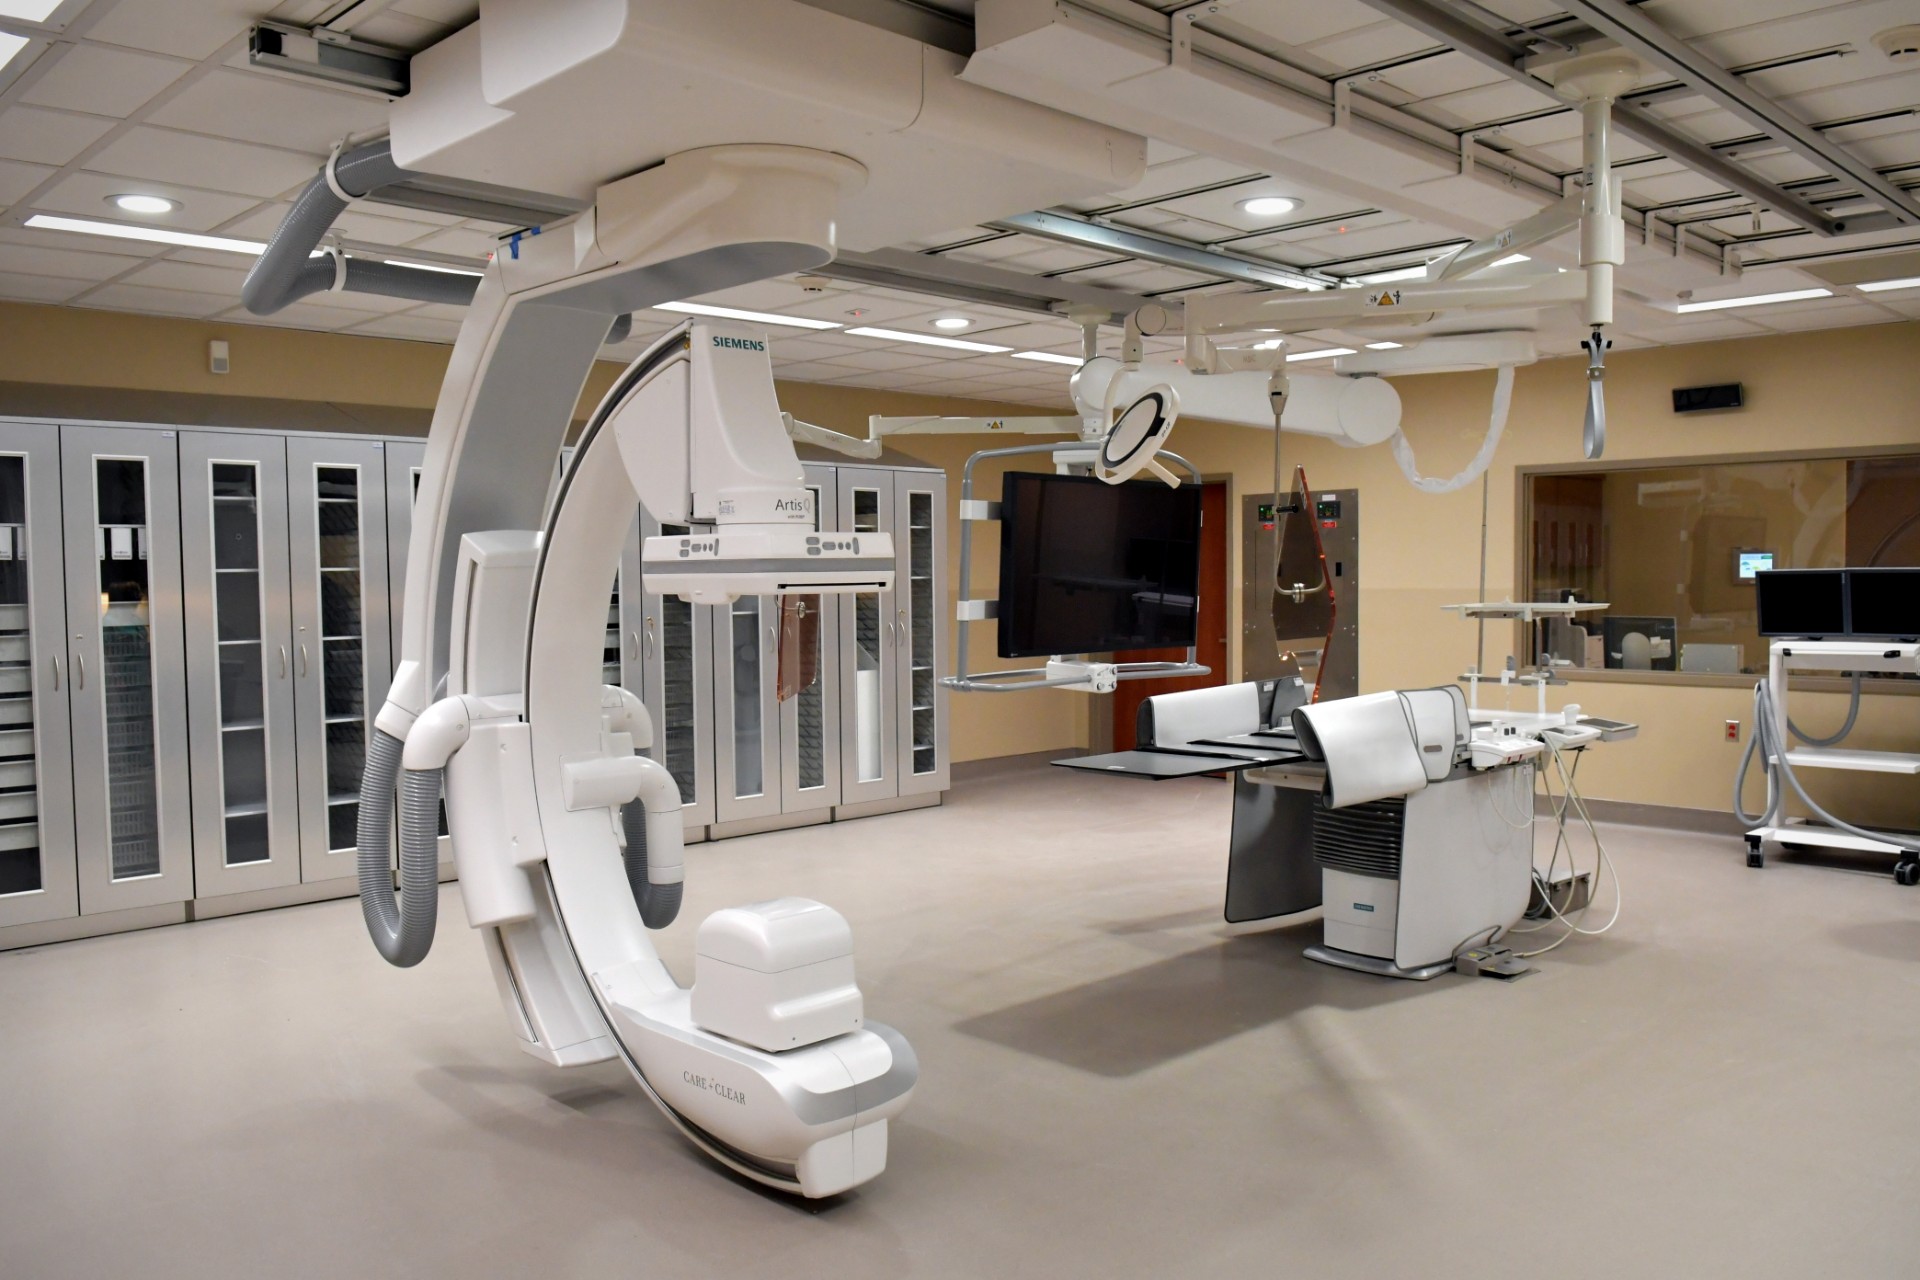 New Heart and Vascular Tower Expands Cardiovascular, Radiology Services for Patients in Cabarrus, Rowan County Regions